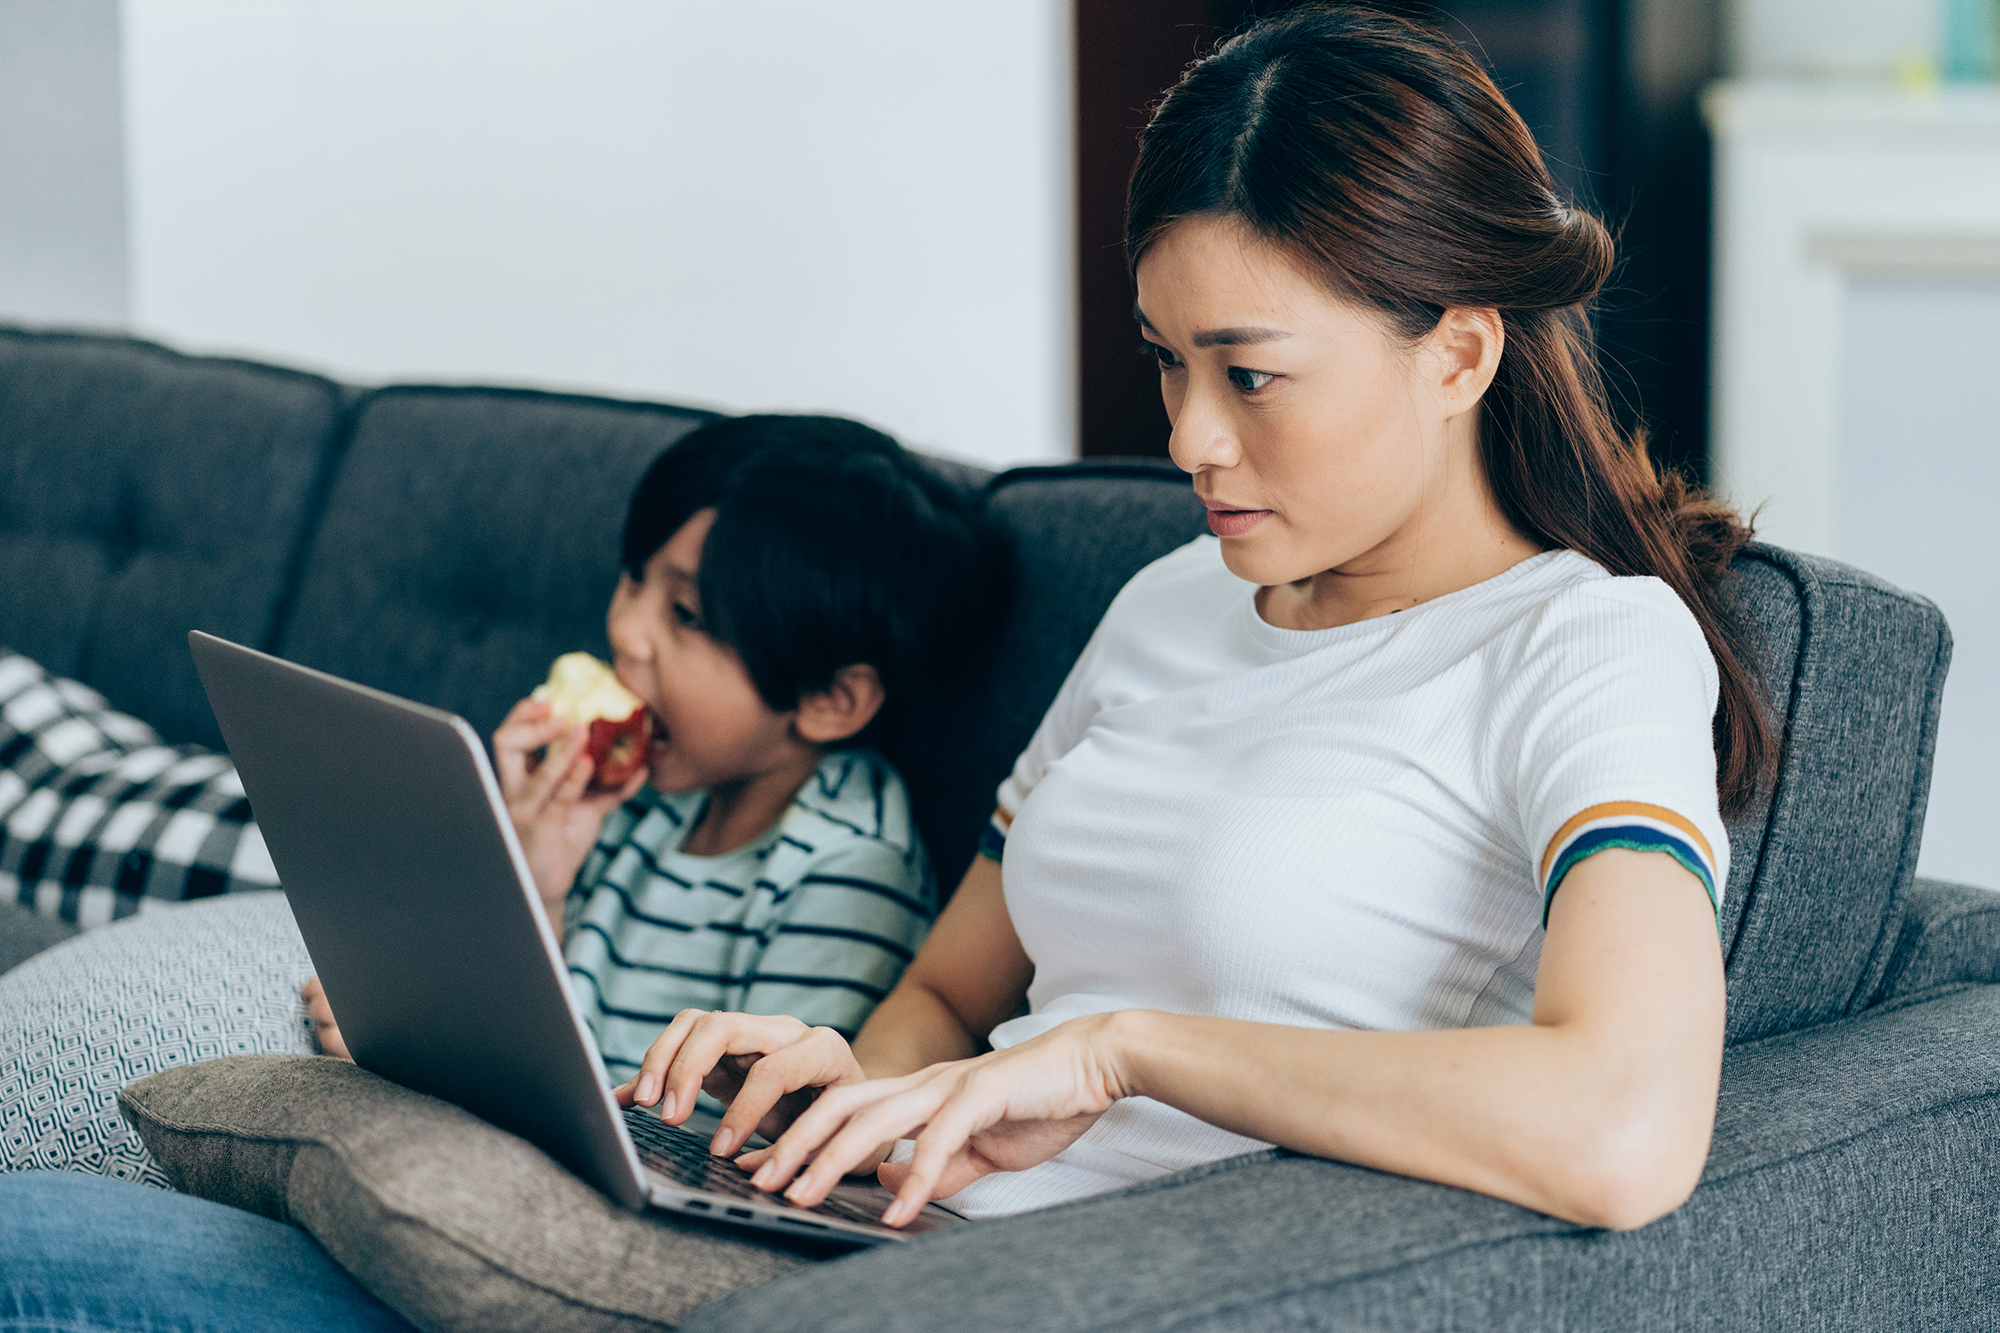 Mom taking online course with son sitting next to her from the comfort of her couch